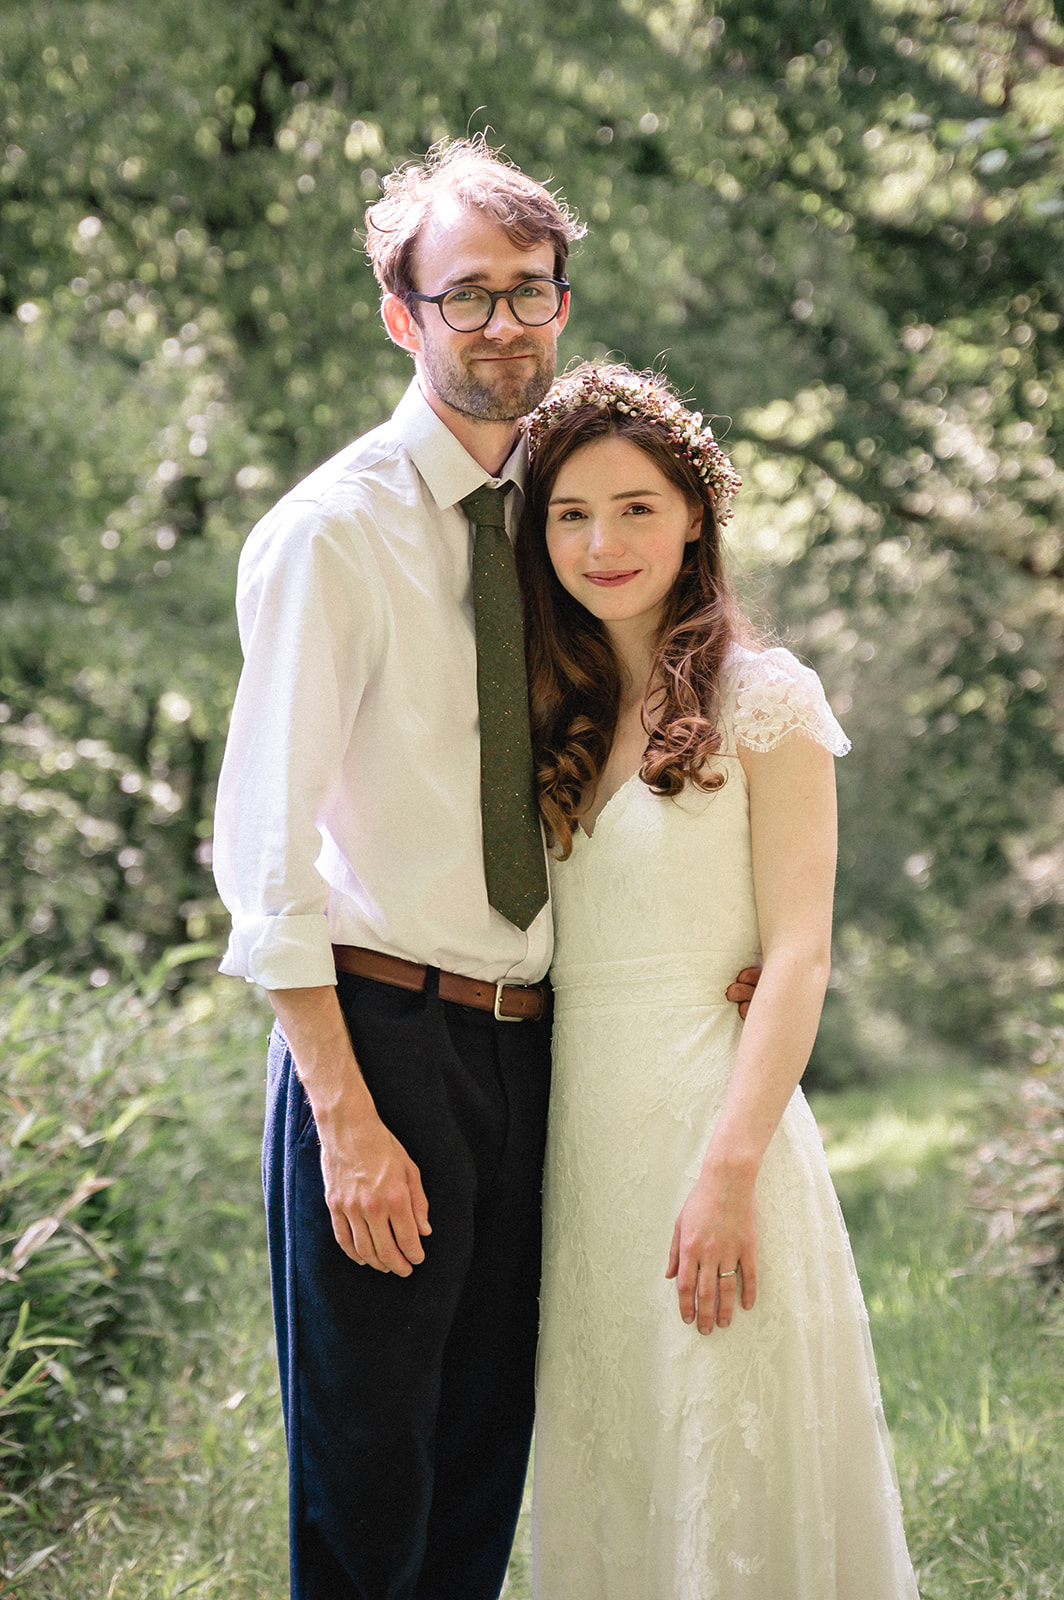 Romantic portrait of Eleanor & Hartley at the Organ House at St. Paul's Walden Bury 